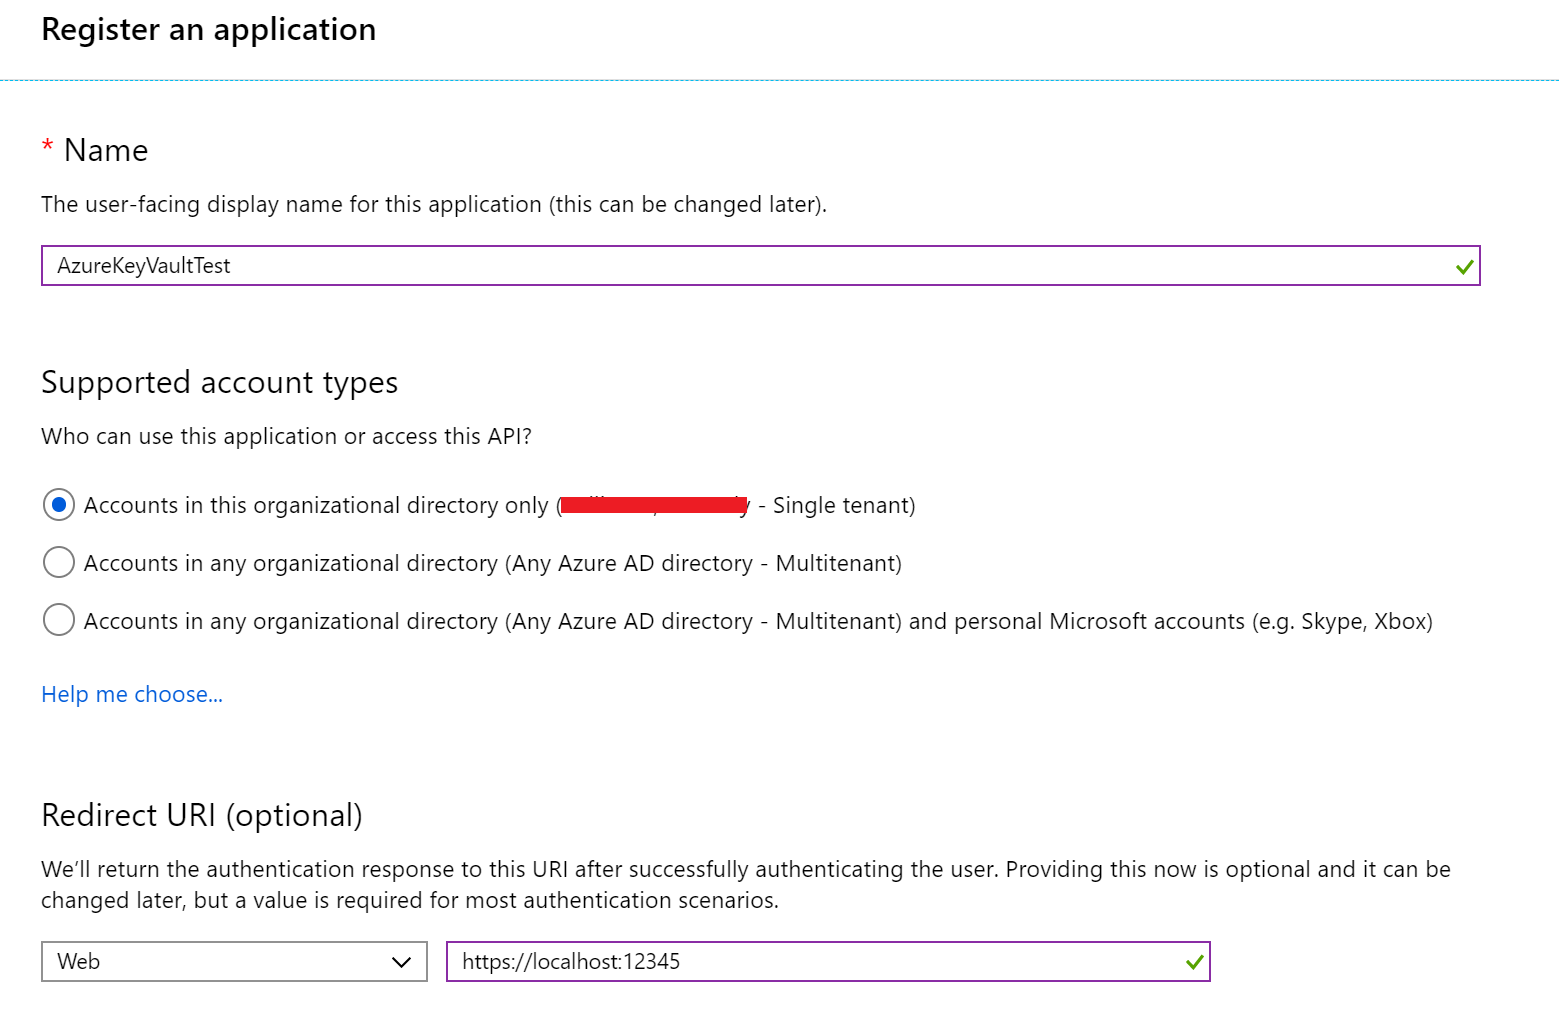 AzureKeyVaultTest is entered in the Name box, and http://localhost:12345 is entered in the Sign-on URL box under Create.